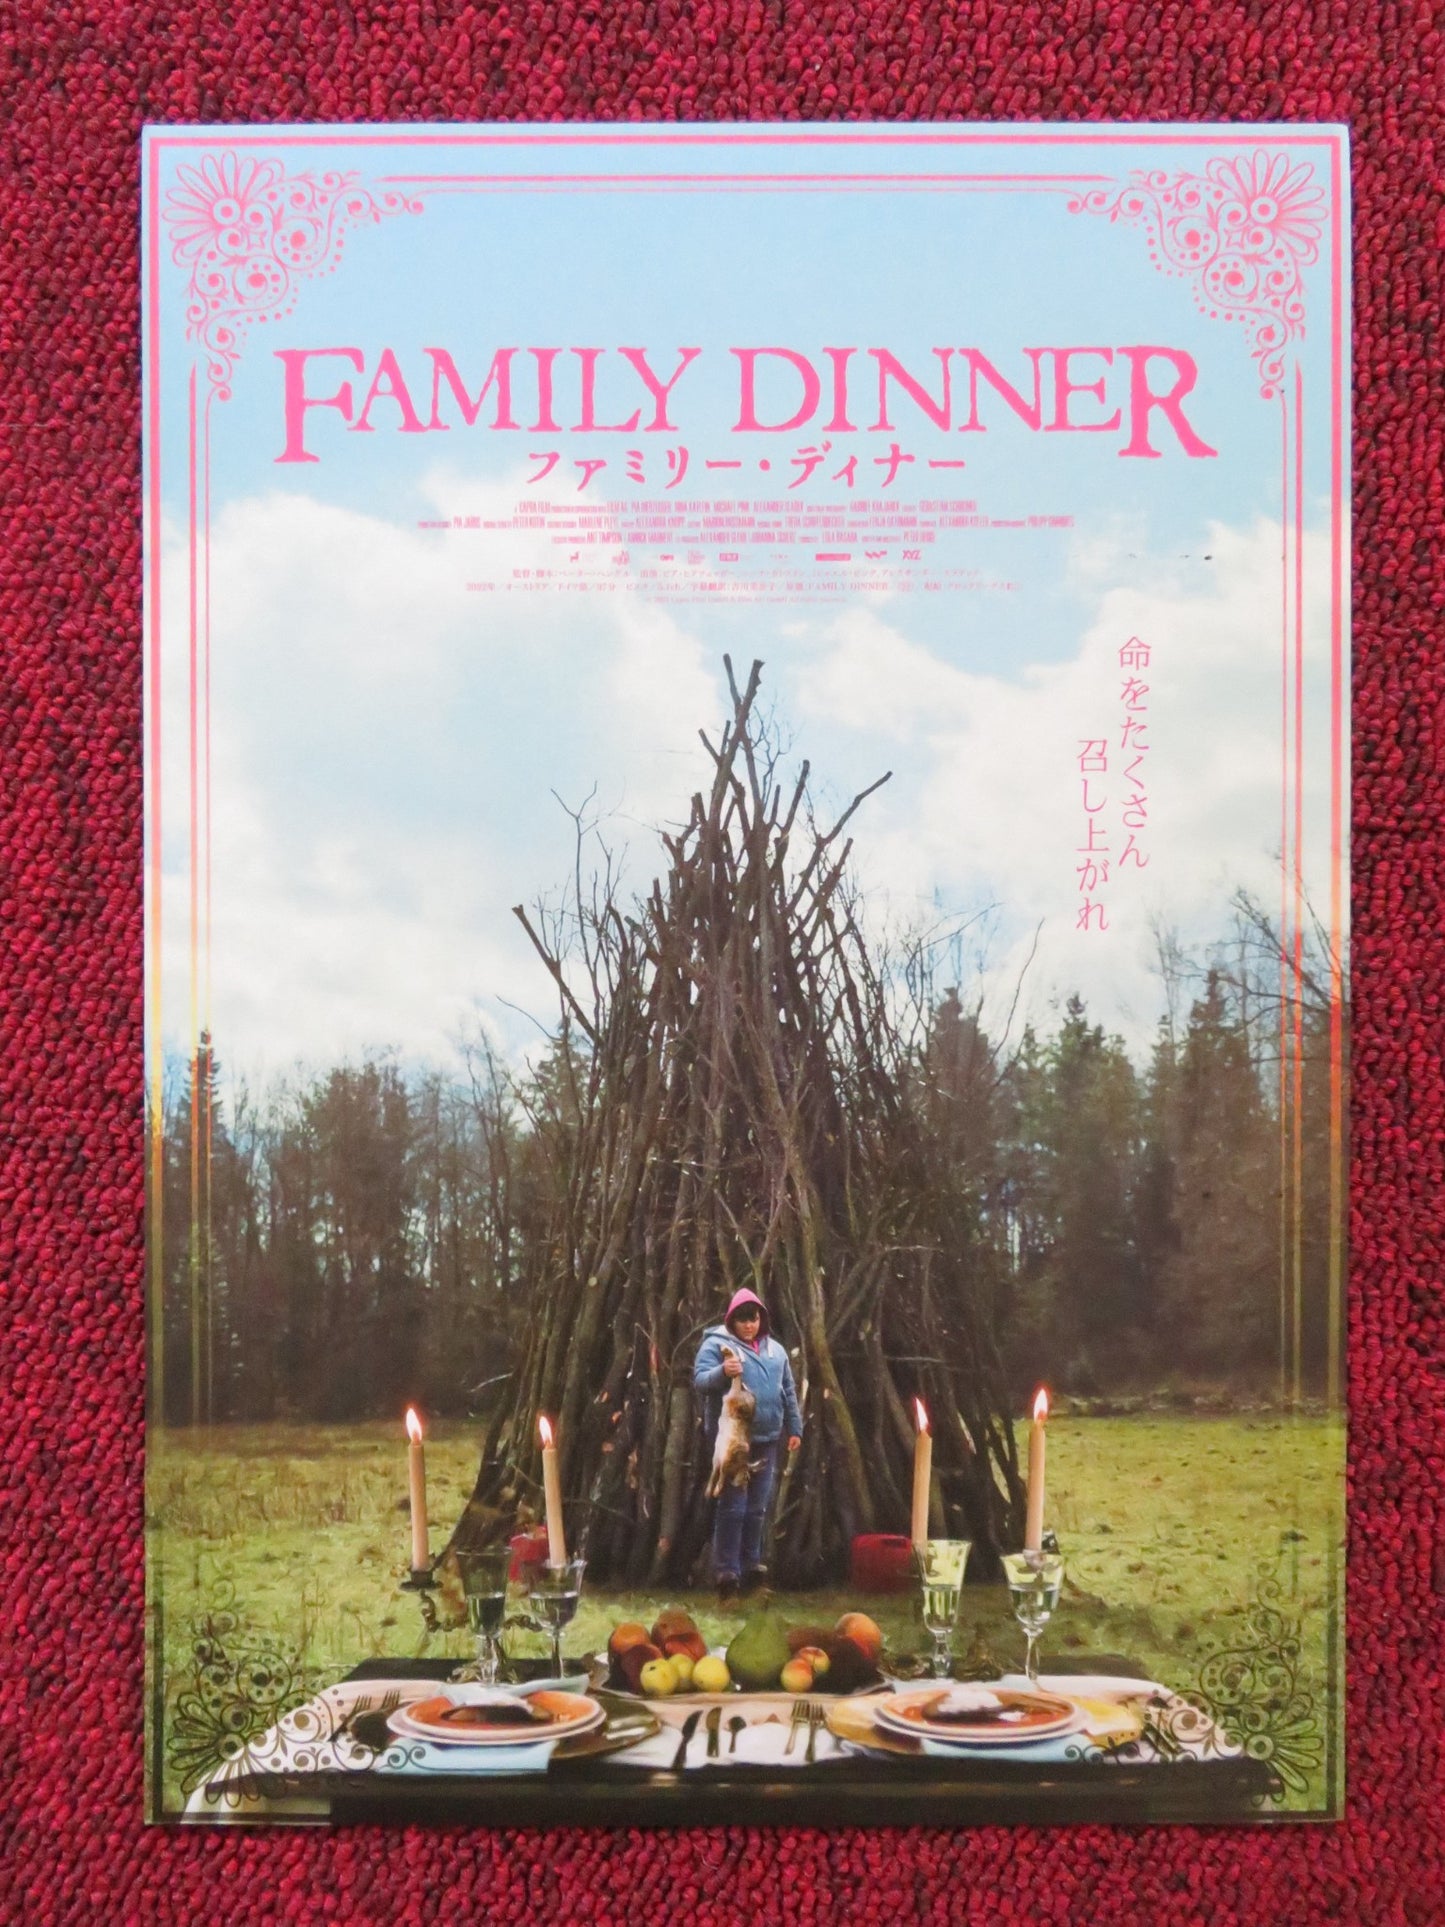 FAMILY DINNER - A JAPANESE CHIRASHI (B5) POSTER PIA HIERZEGGER MICHAEL PINK 2022